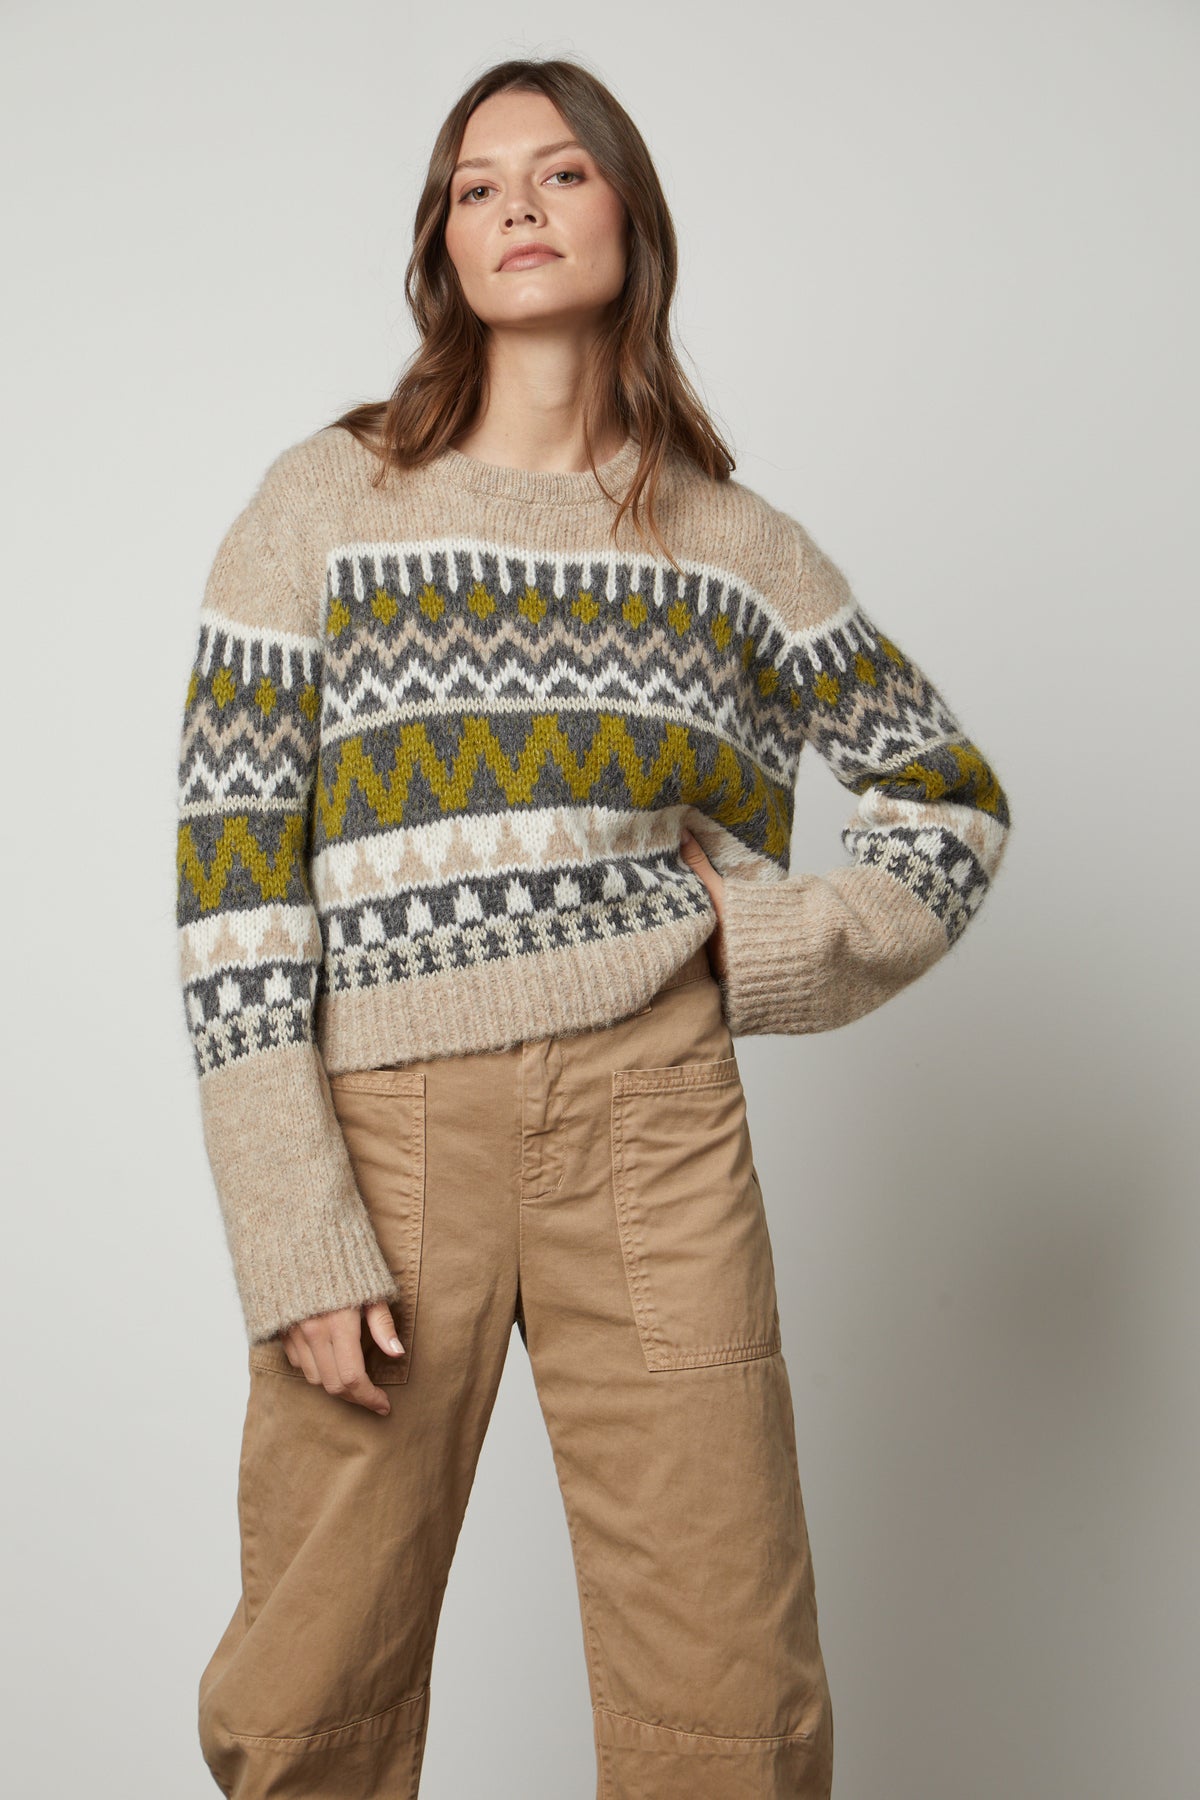   The model is wearing a cozy Velvet by Graham & Spencer MAKENZIE ALPACA CABLE KNIT CREW NECK SWEATER. 